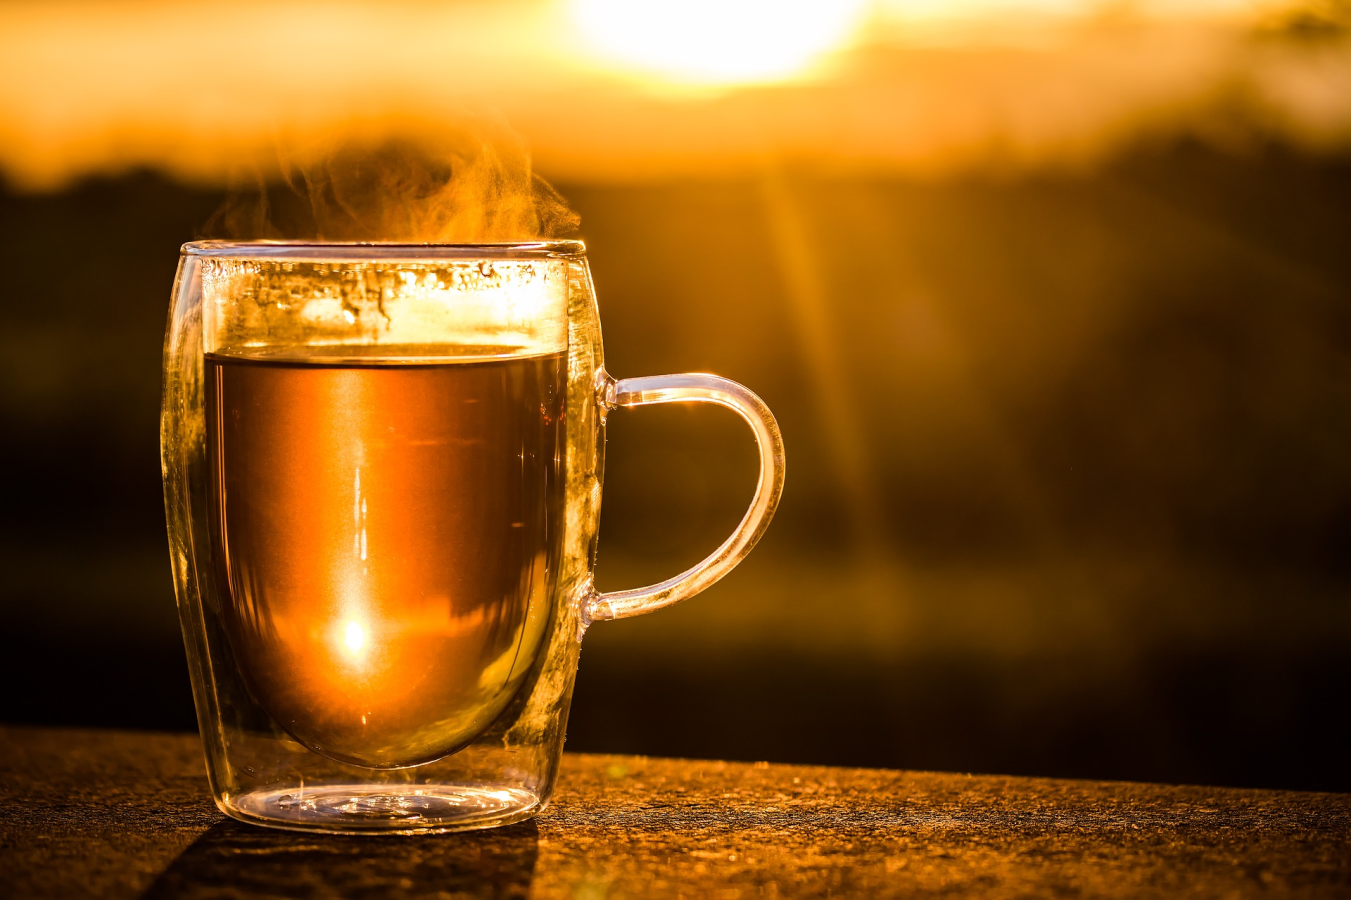 Golden Cup Of Hot And Fresh Steeped Tea In Clear Mug Outside In Golden Hour Lighting